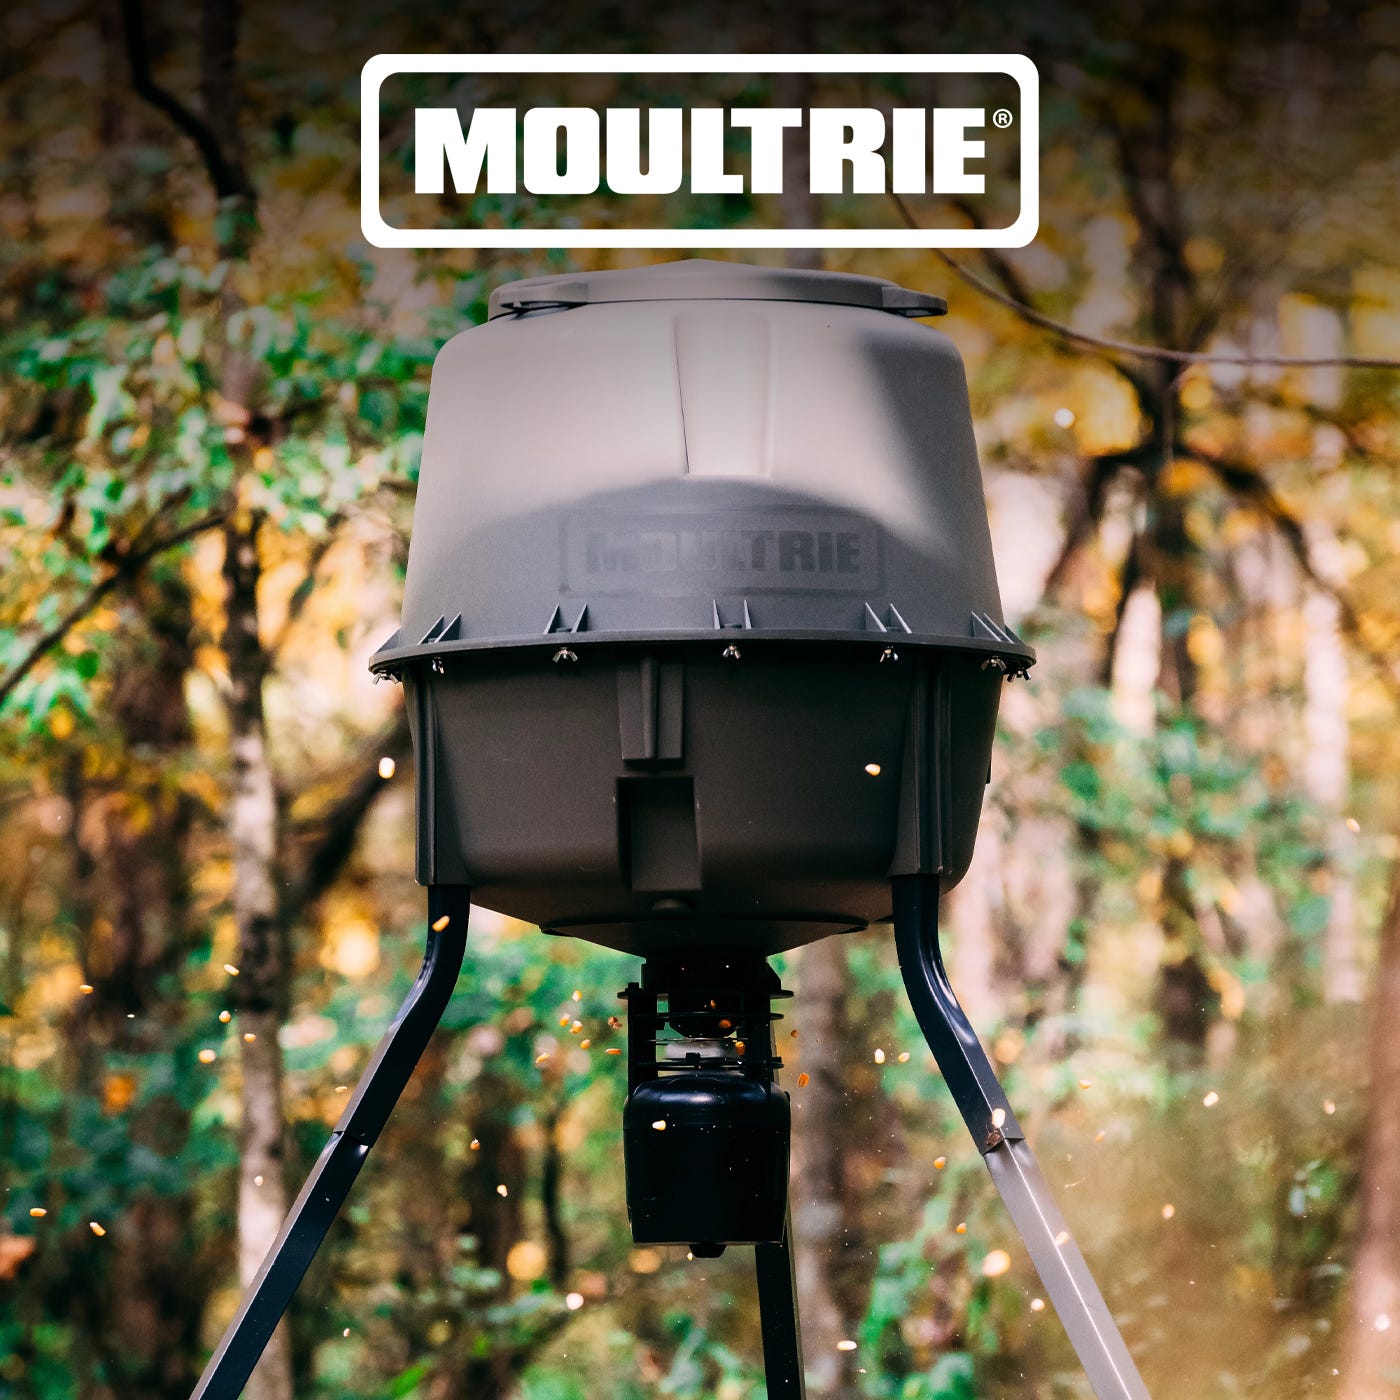 Shop exclusive holiday deals from Moultrie